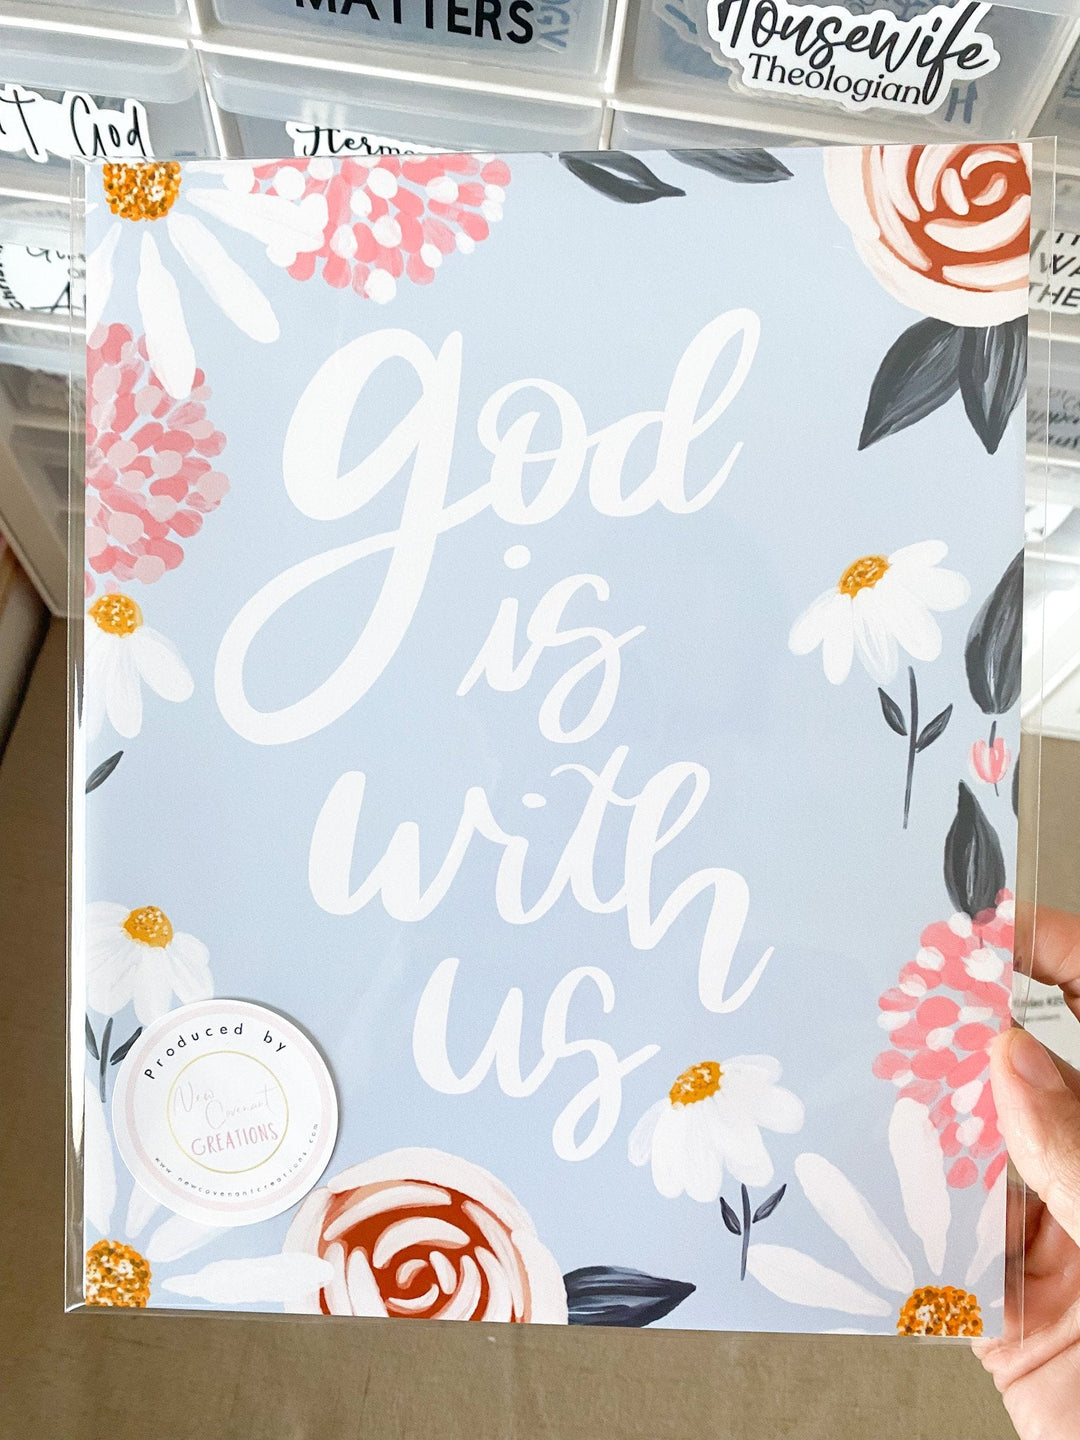 God Is With Us - 8 x 10 Floral Art Print Quick Ship